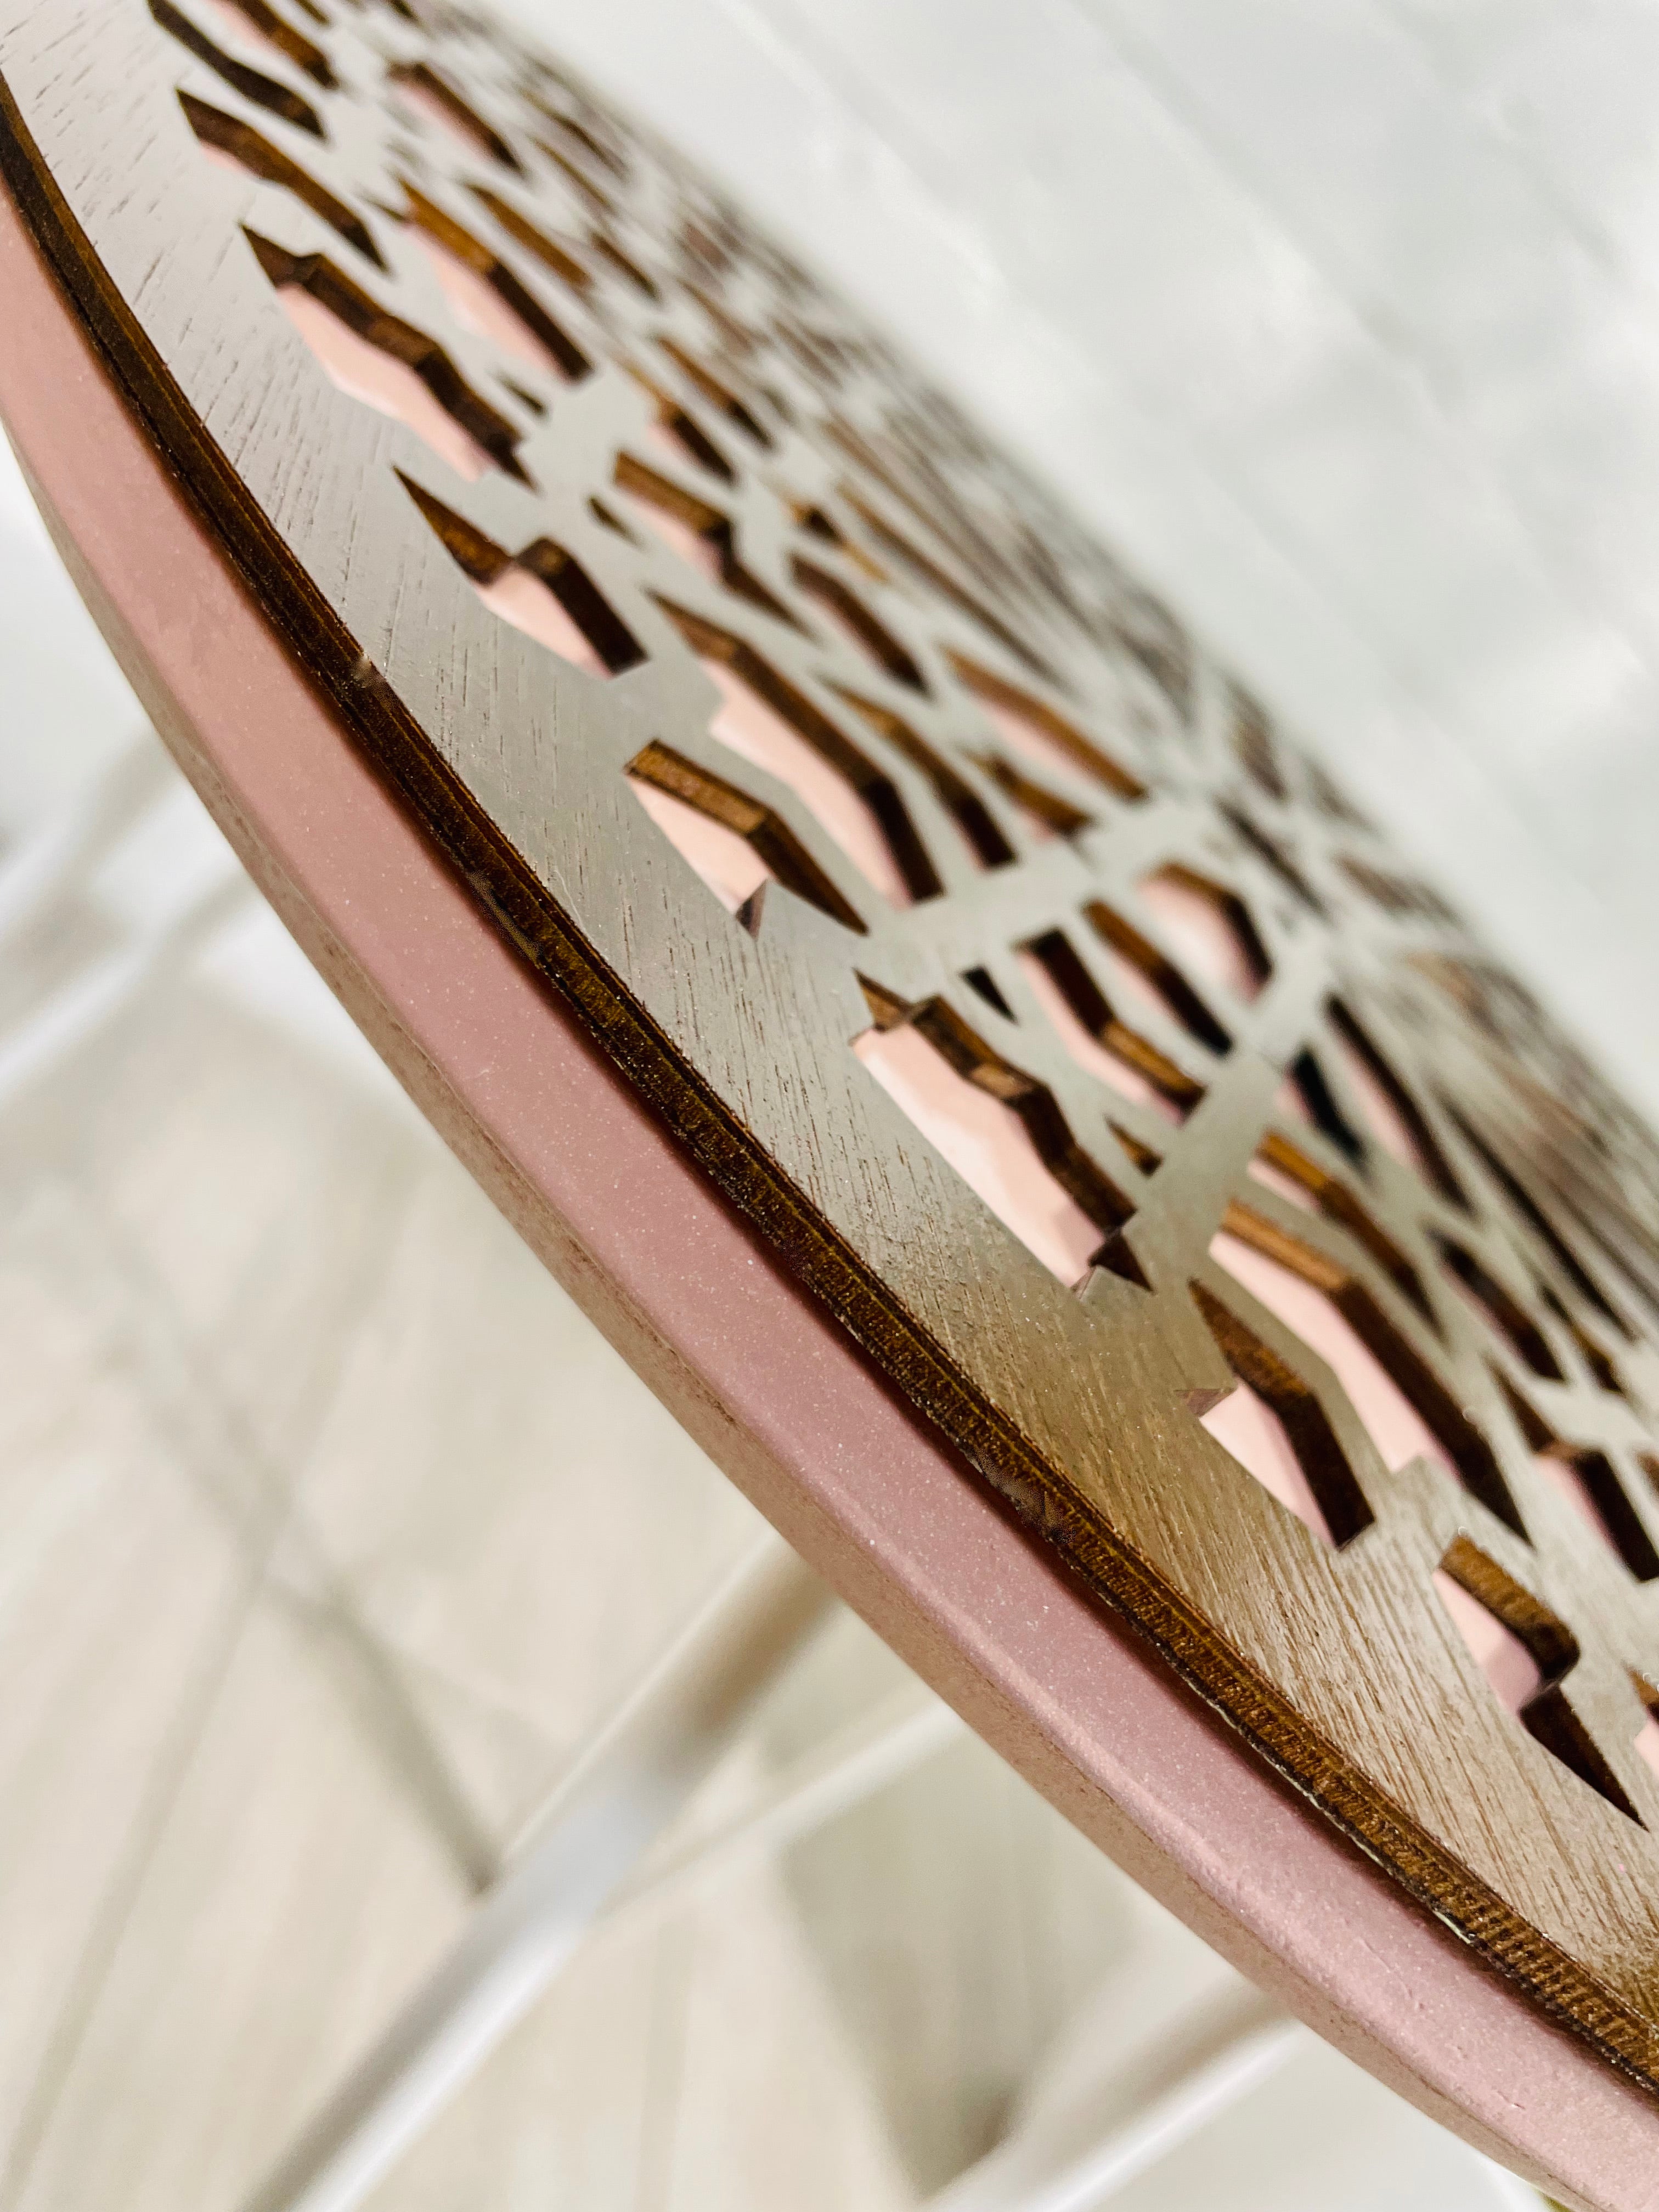 Moroccan Mosaic Side Table Pin Legs, Zellige Table In Pastel Dusty Pink And Walnut Wood stain with Glass Top